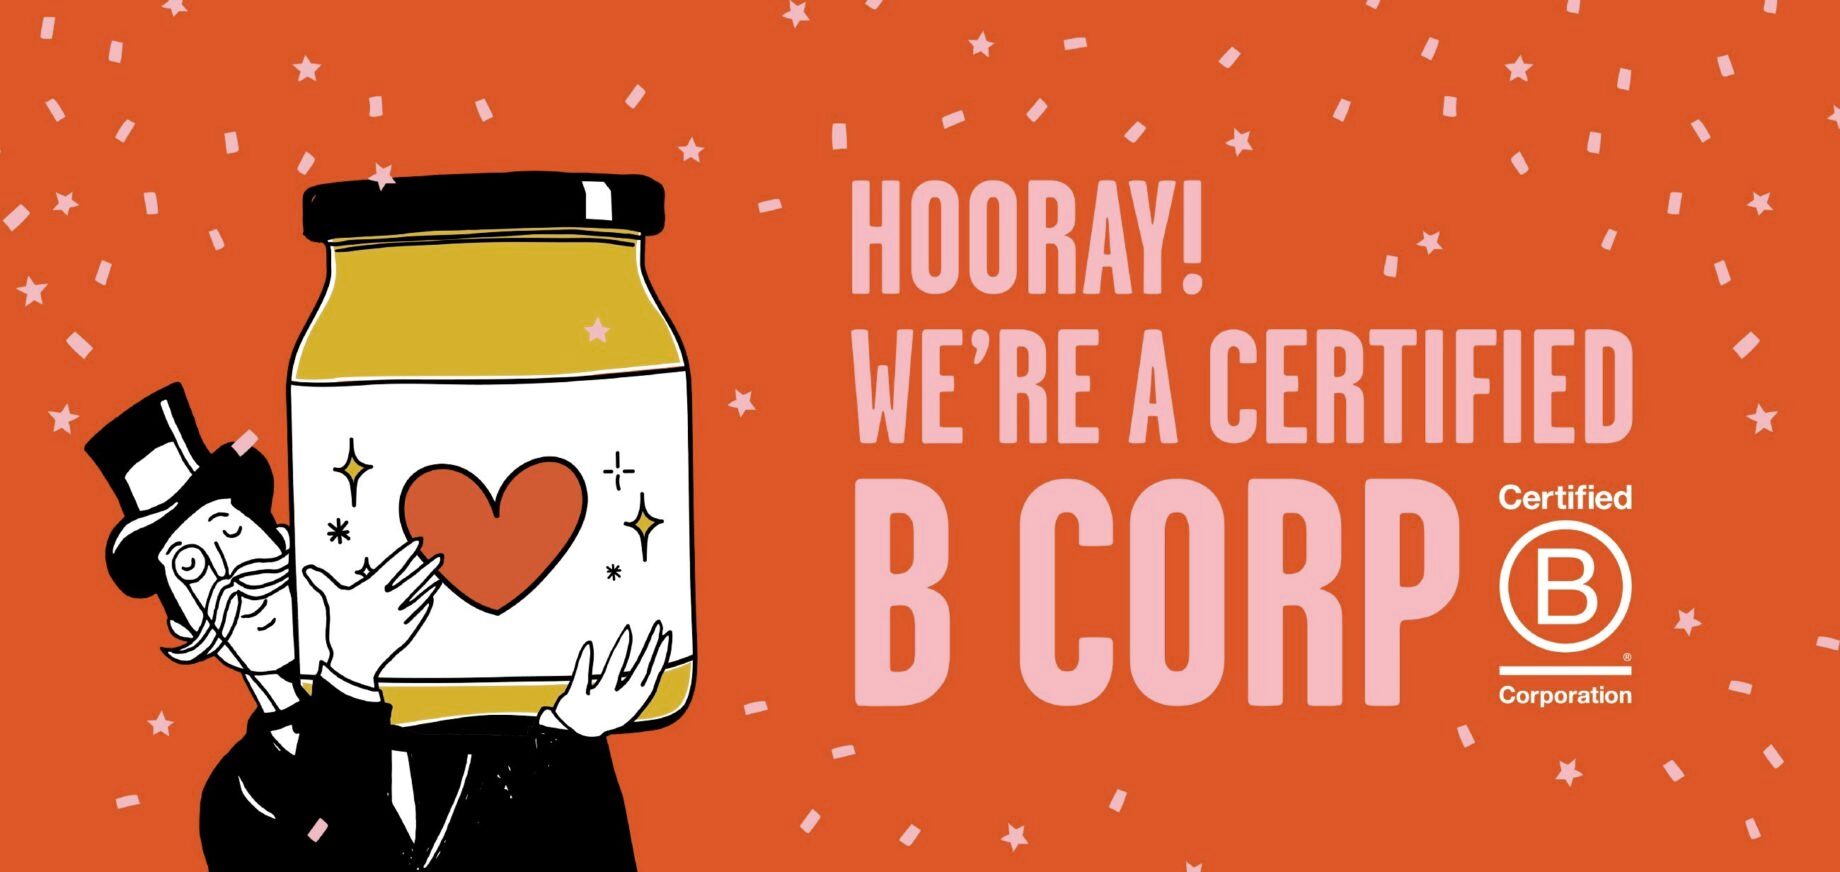 We are certified BCorp